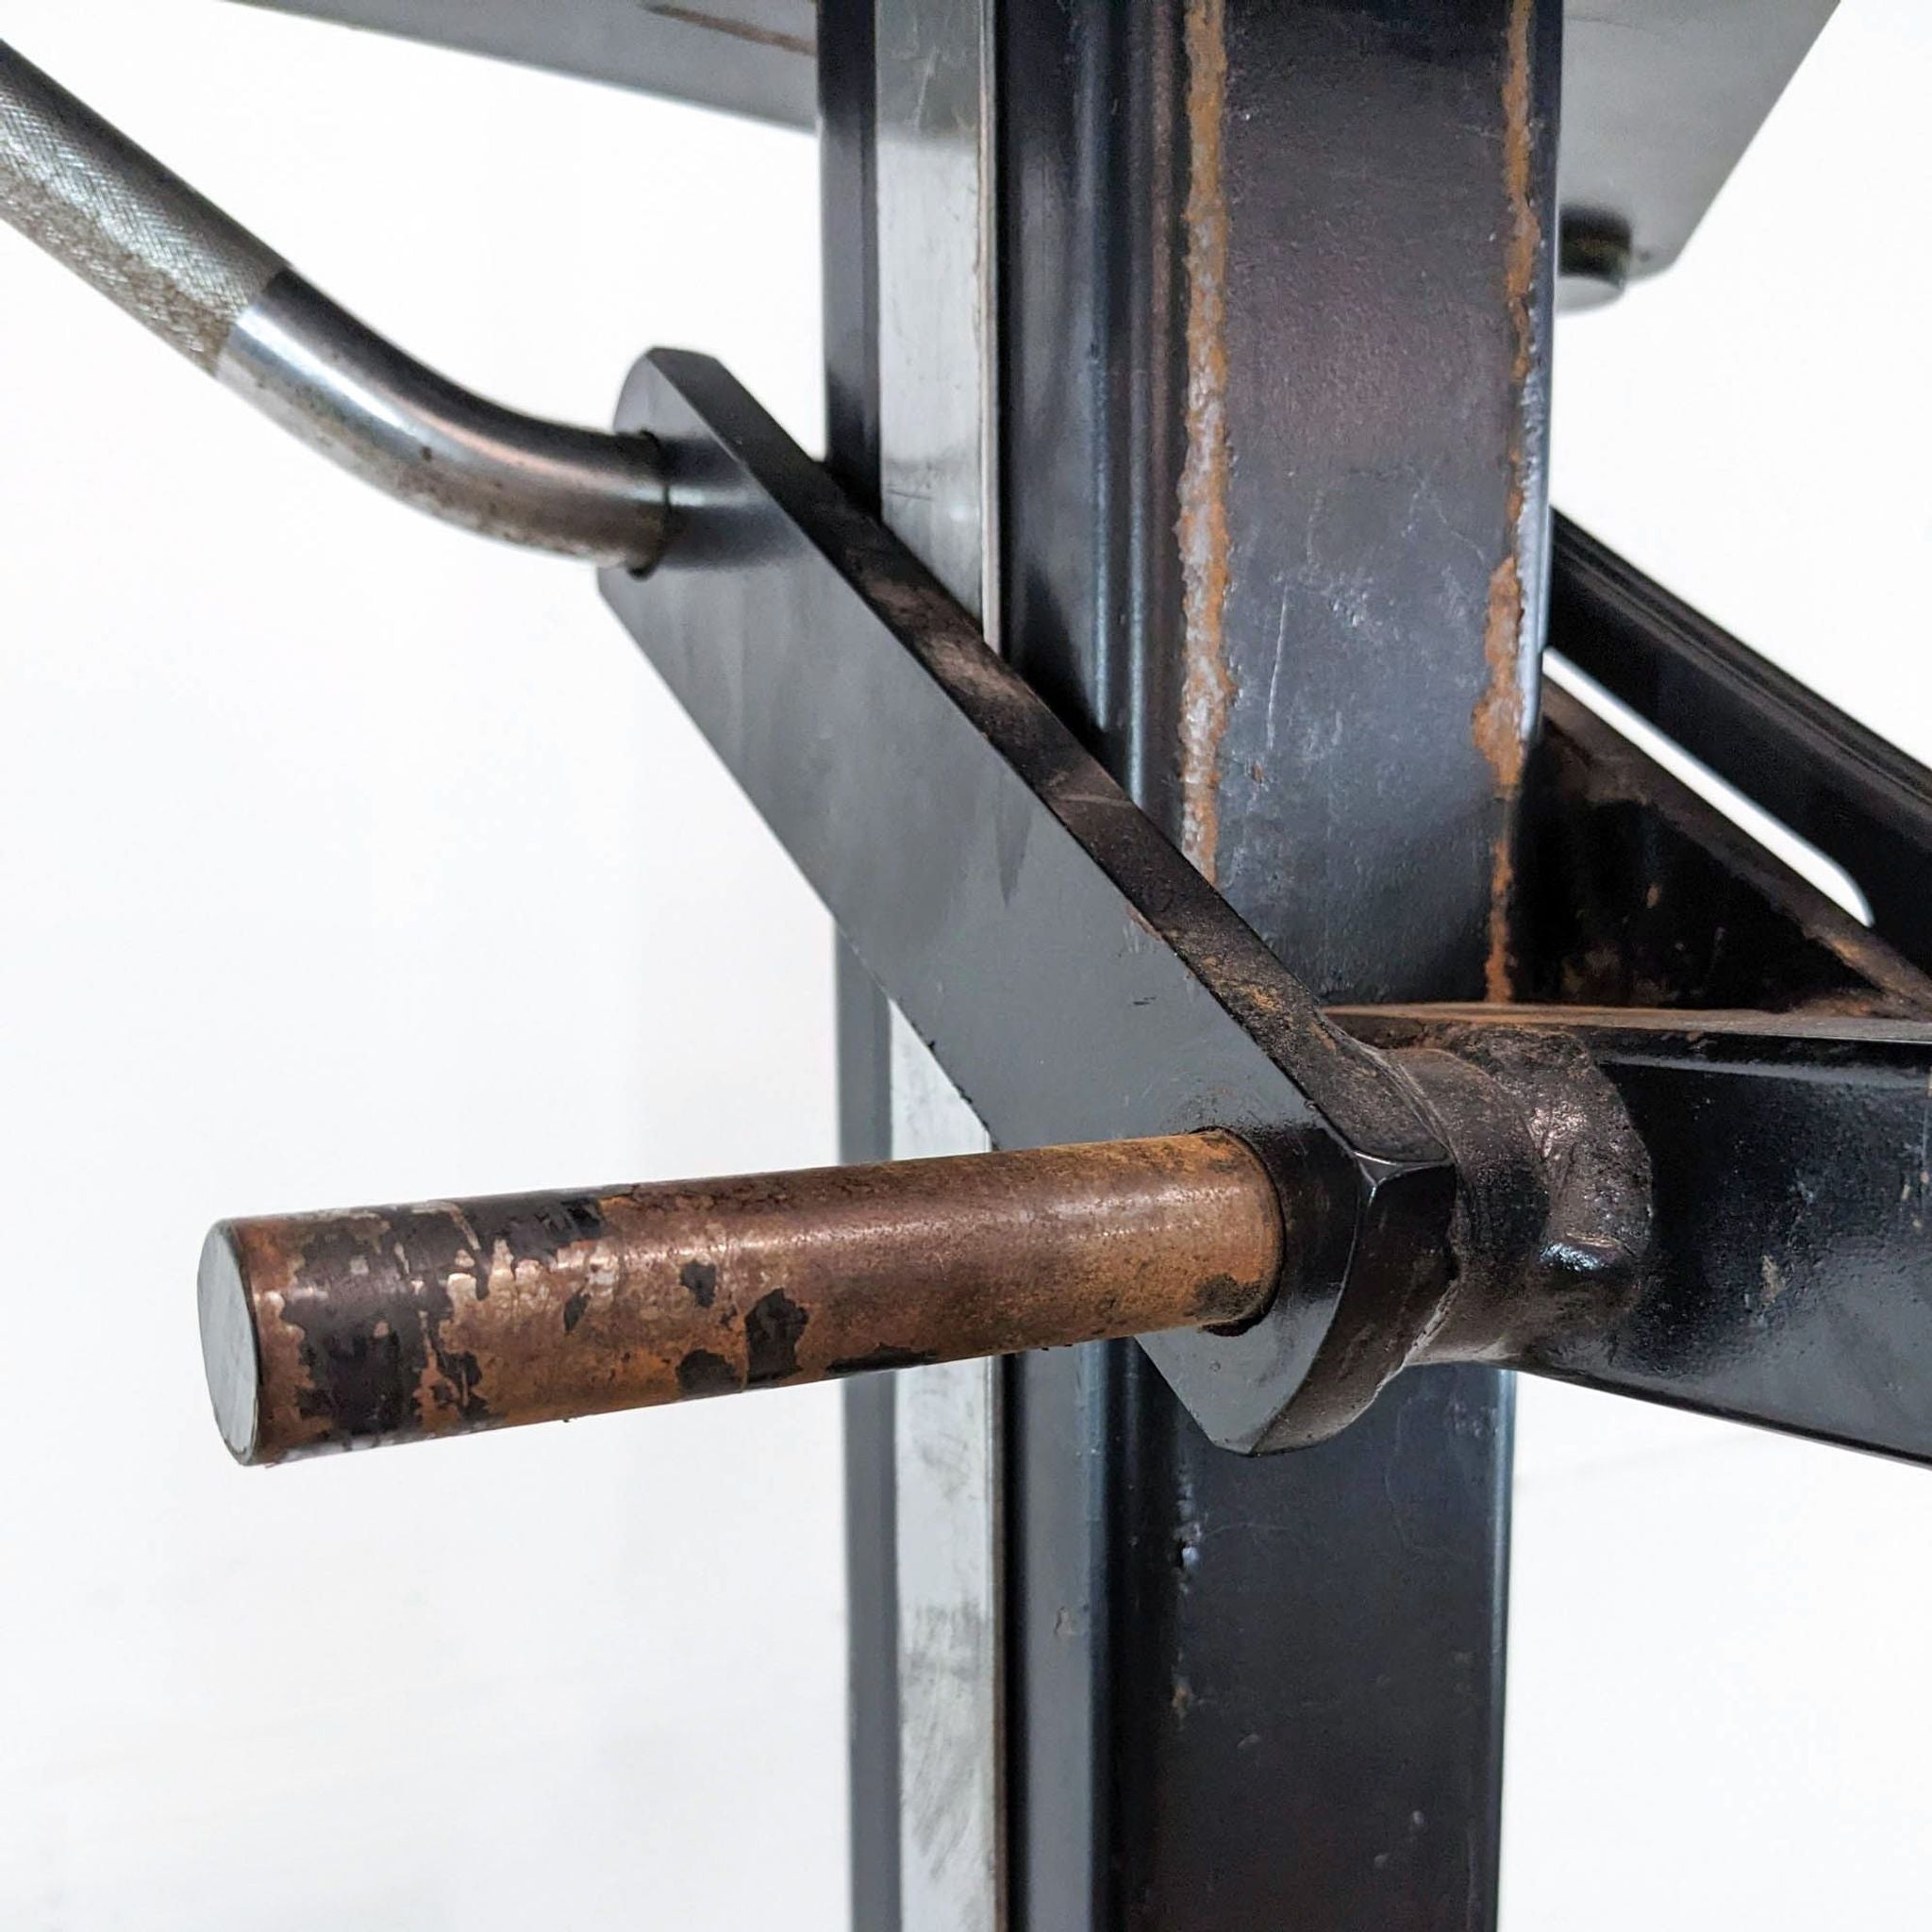 Close-up of a worn Soloflex gym equipment part with metal bars and joints.